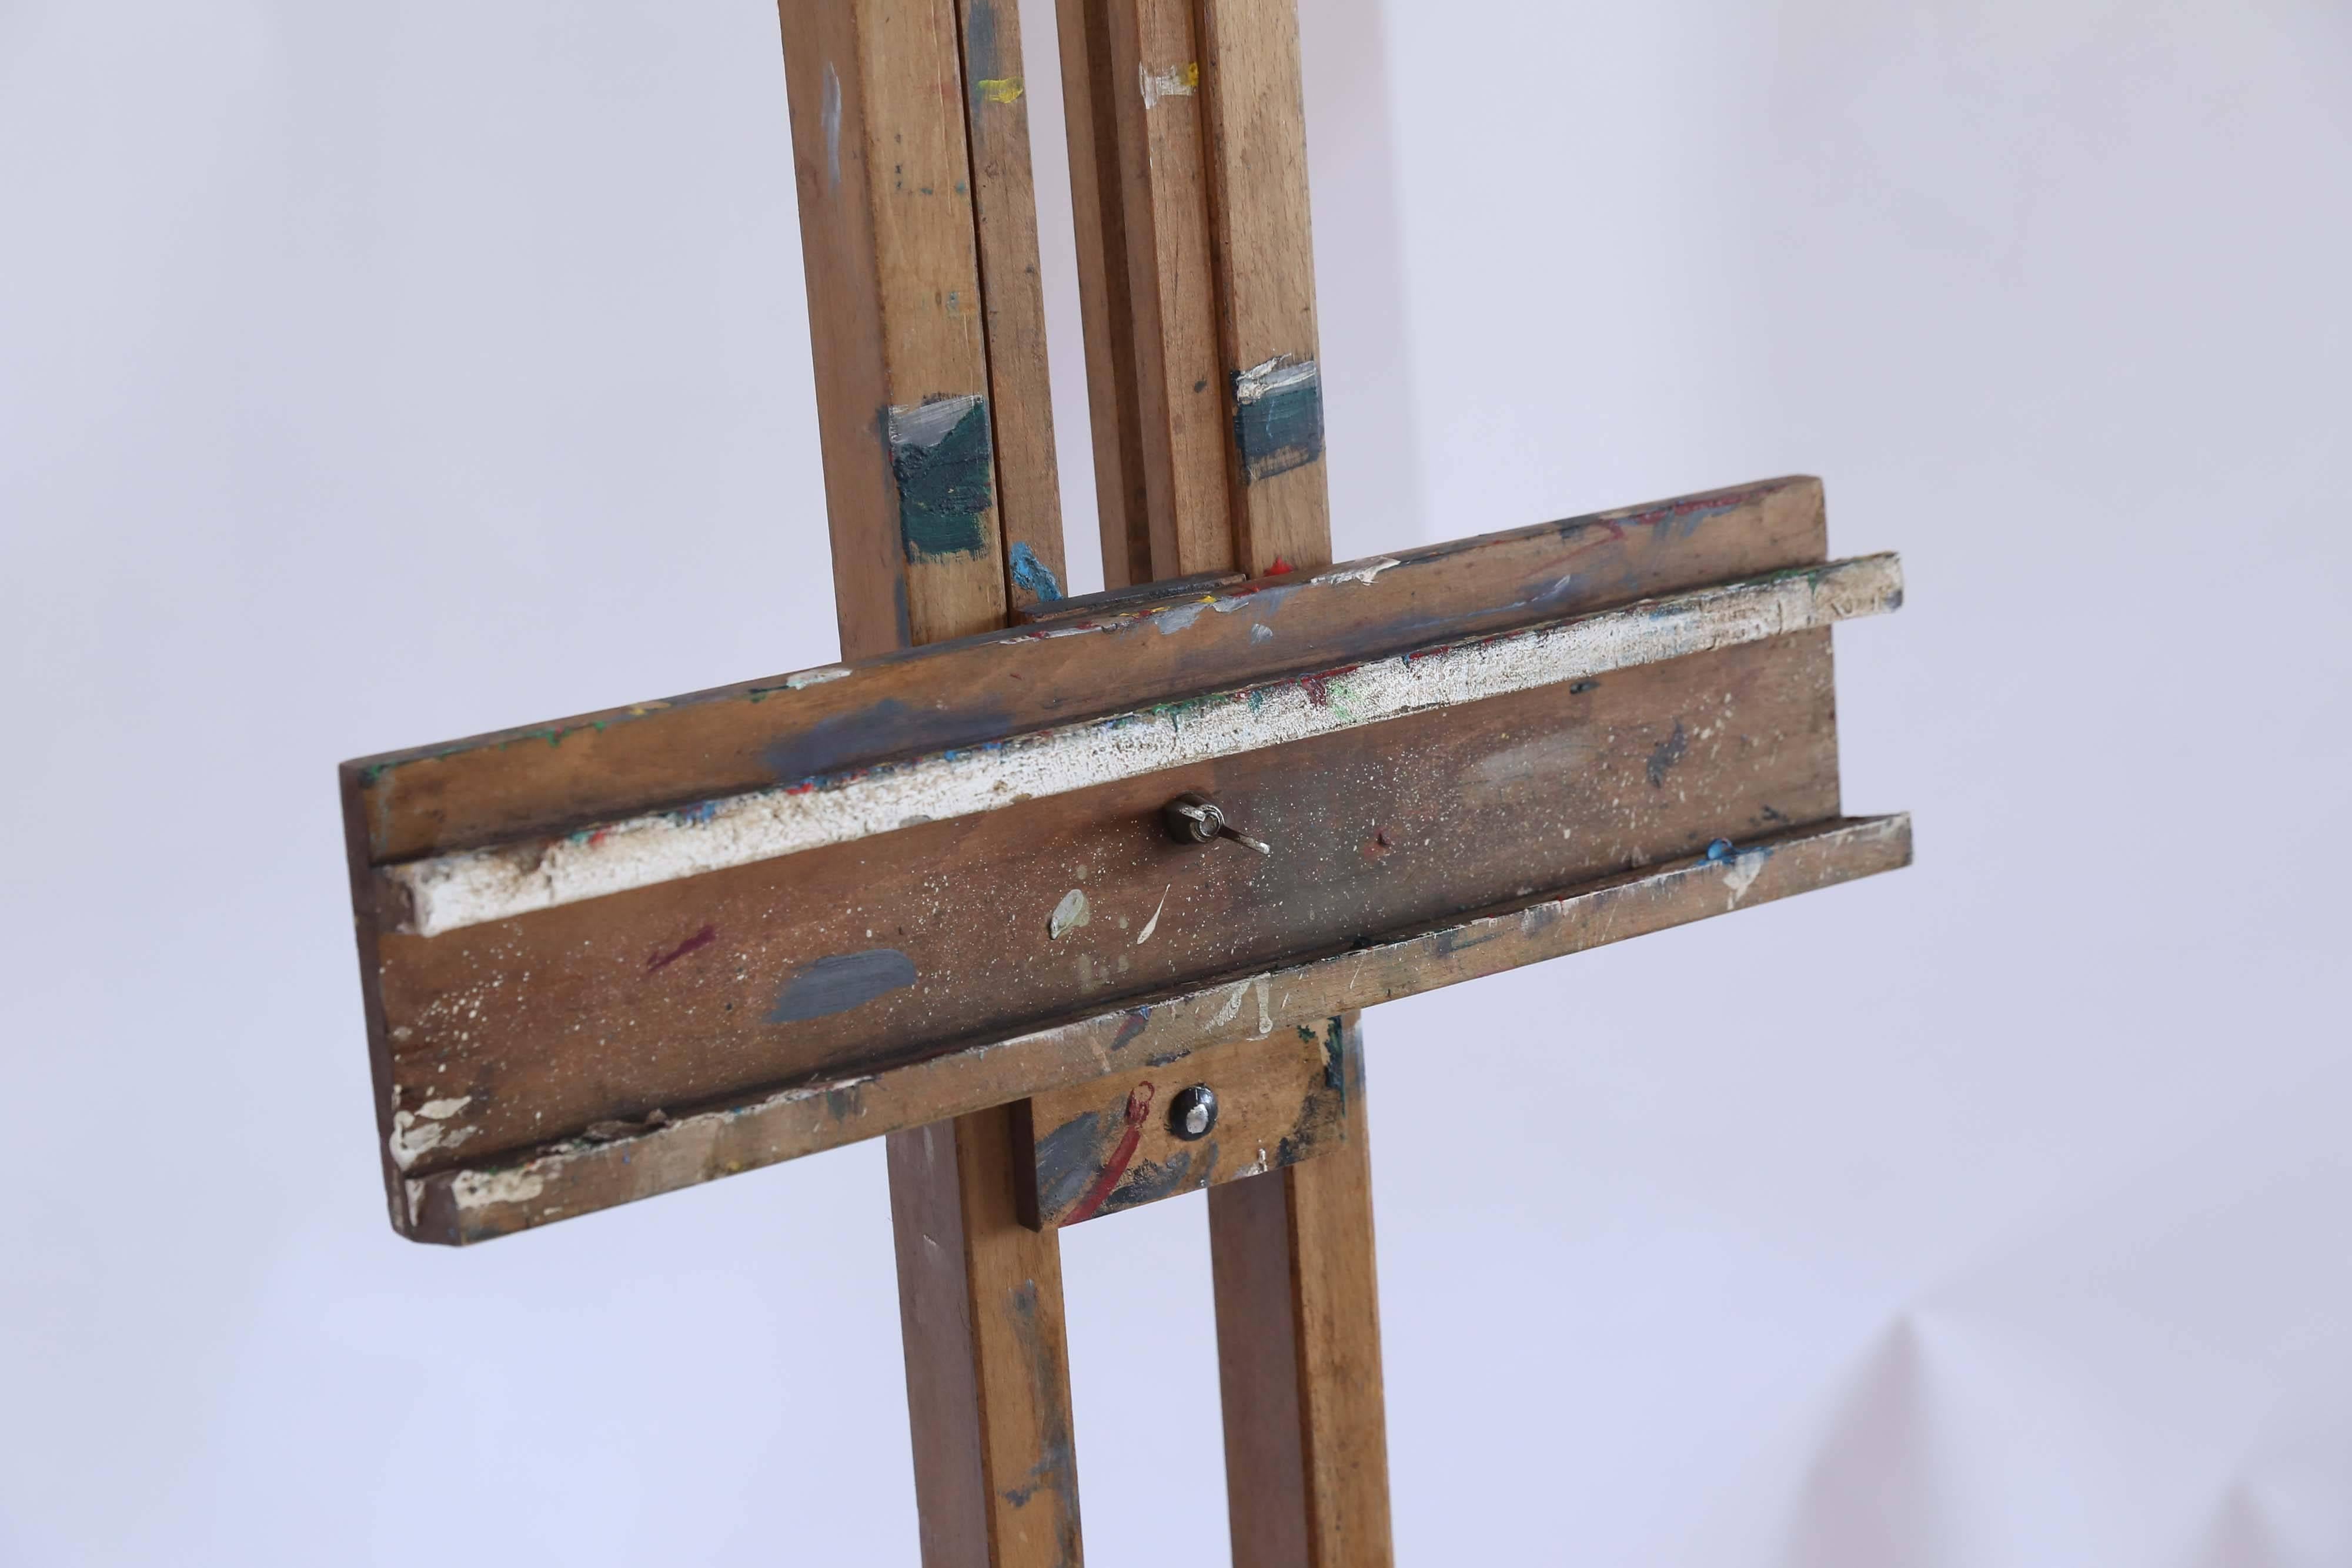 A vintage painter's easel from an art school in France. Made of wood, the easel has an adjustable tilt and the front clamps allow for supporting a canvas of almost any size. Splashes and drips of paint in a multitude of colors give a glimpse of the